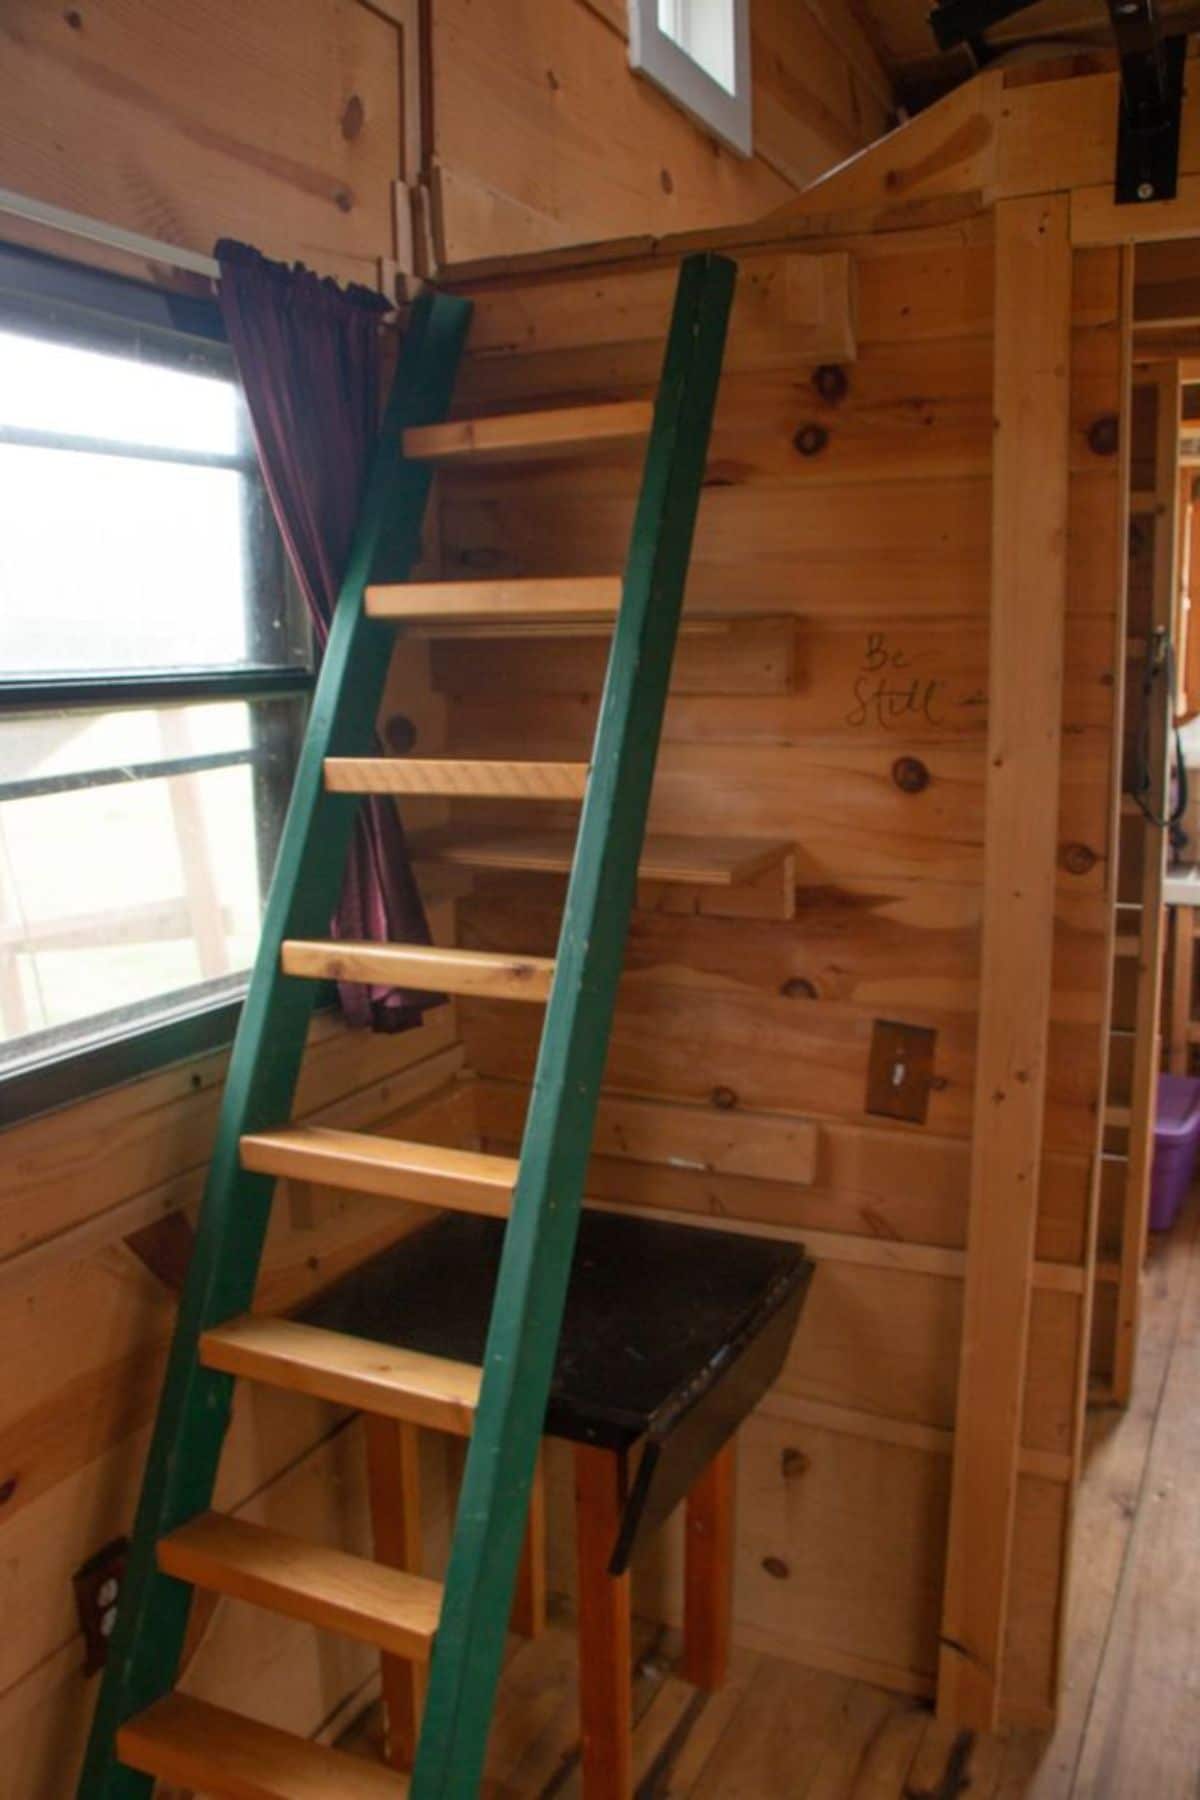 the bedroom is accessible through the ladder which has some drawers and storage under it